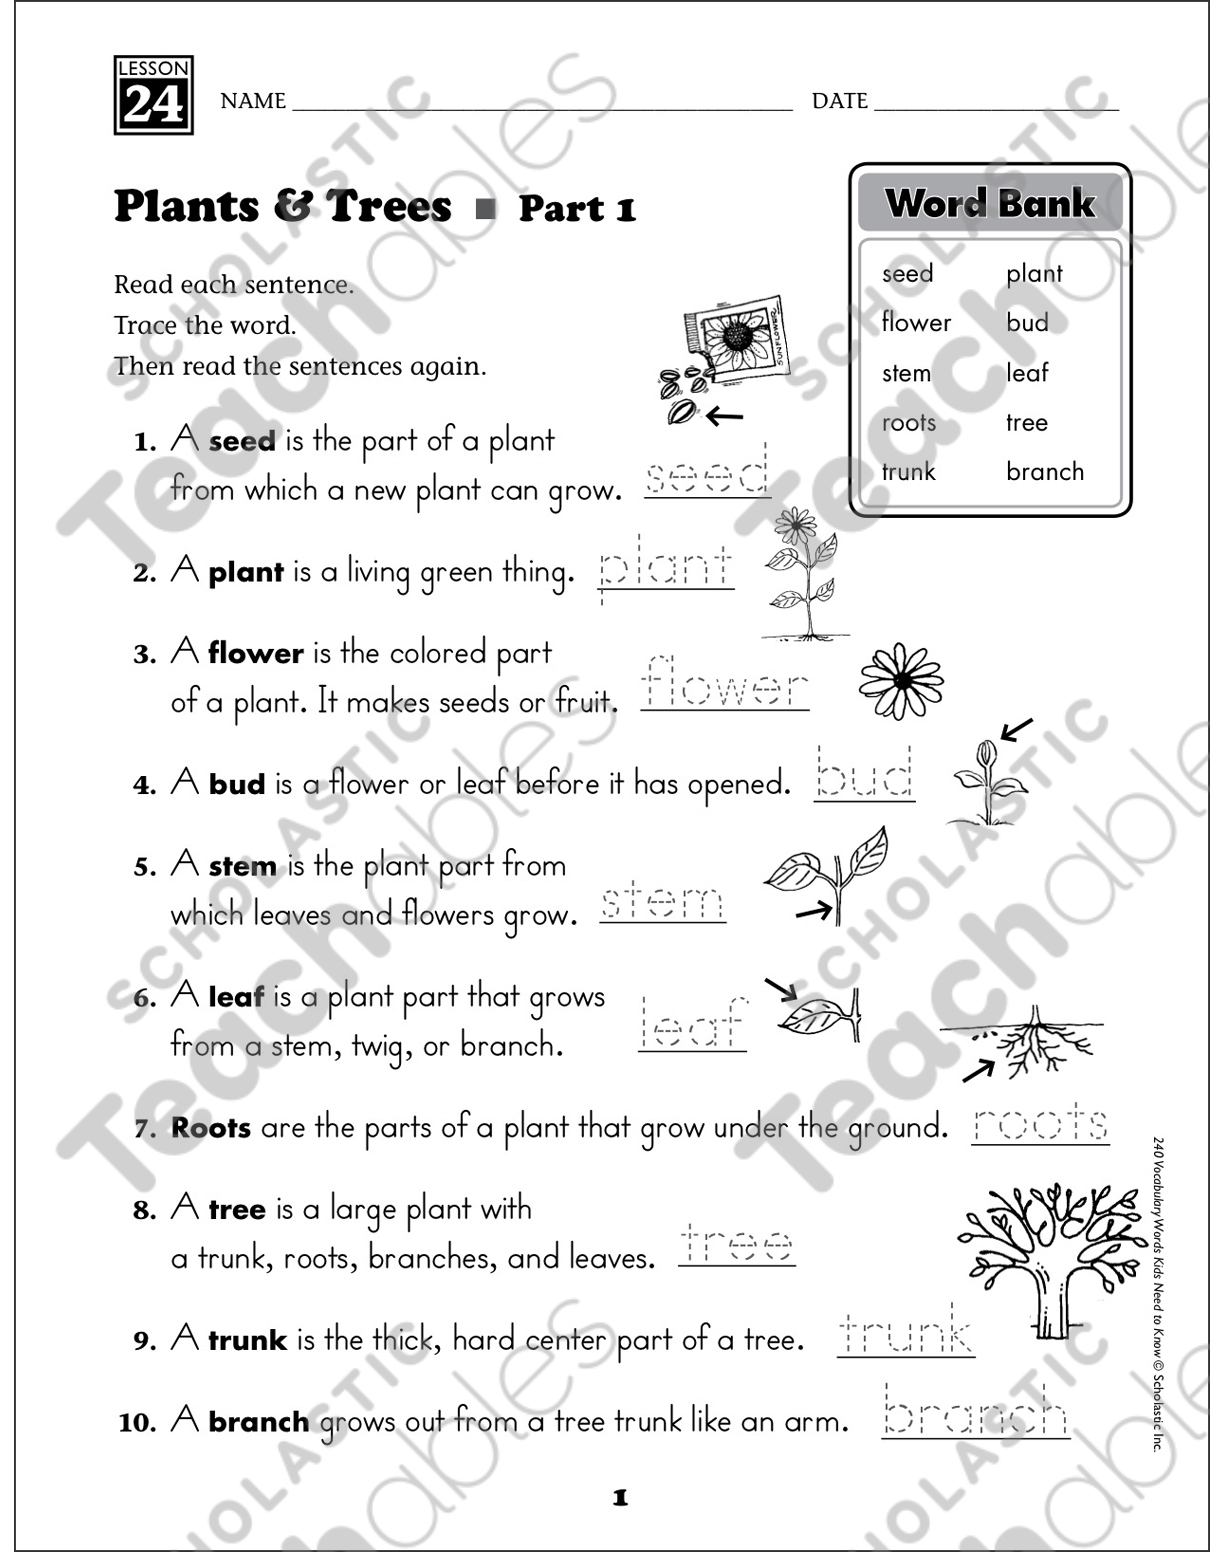 plants and trees content words grade 1 vocabulary printable skills sheets